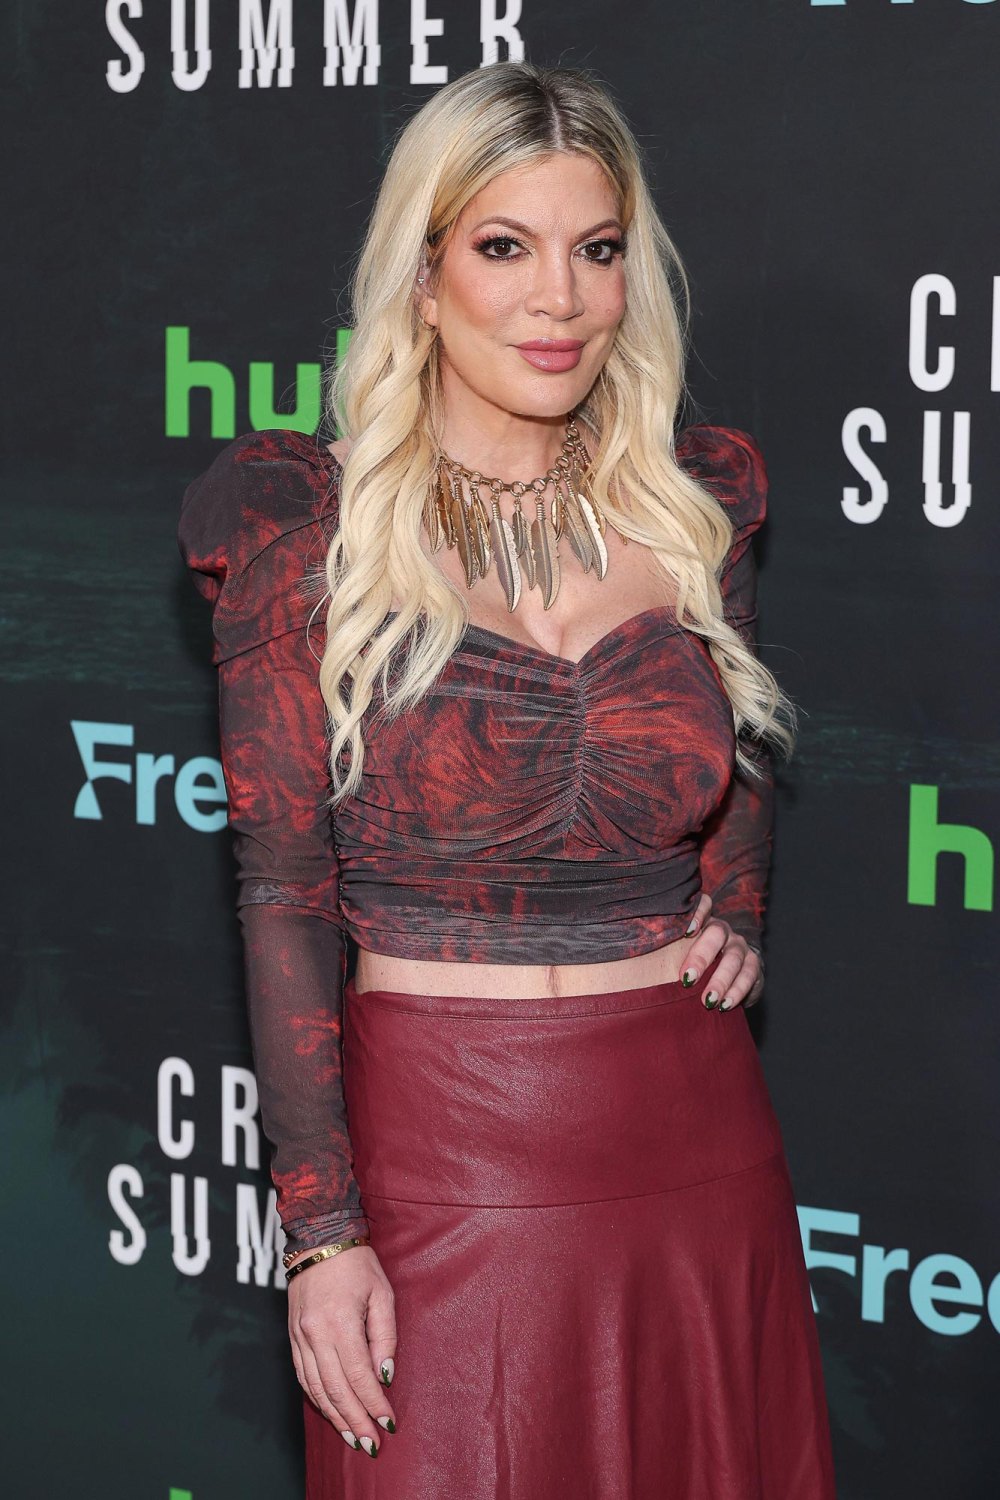 Tori-Spelling-Has-Girl-s-Night-Out-With-Daughters-Stella-and-Hattie-at--Cruel-Summer--Premiere--Photo-221